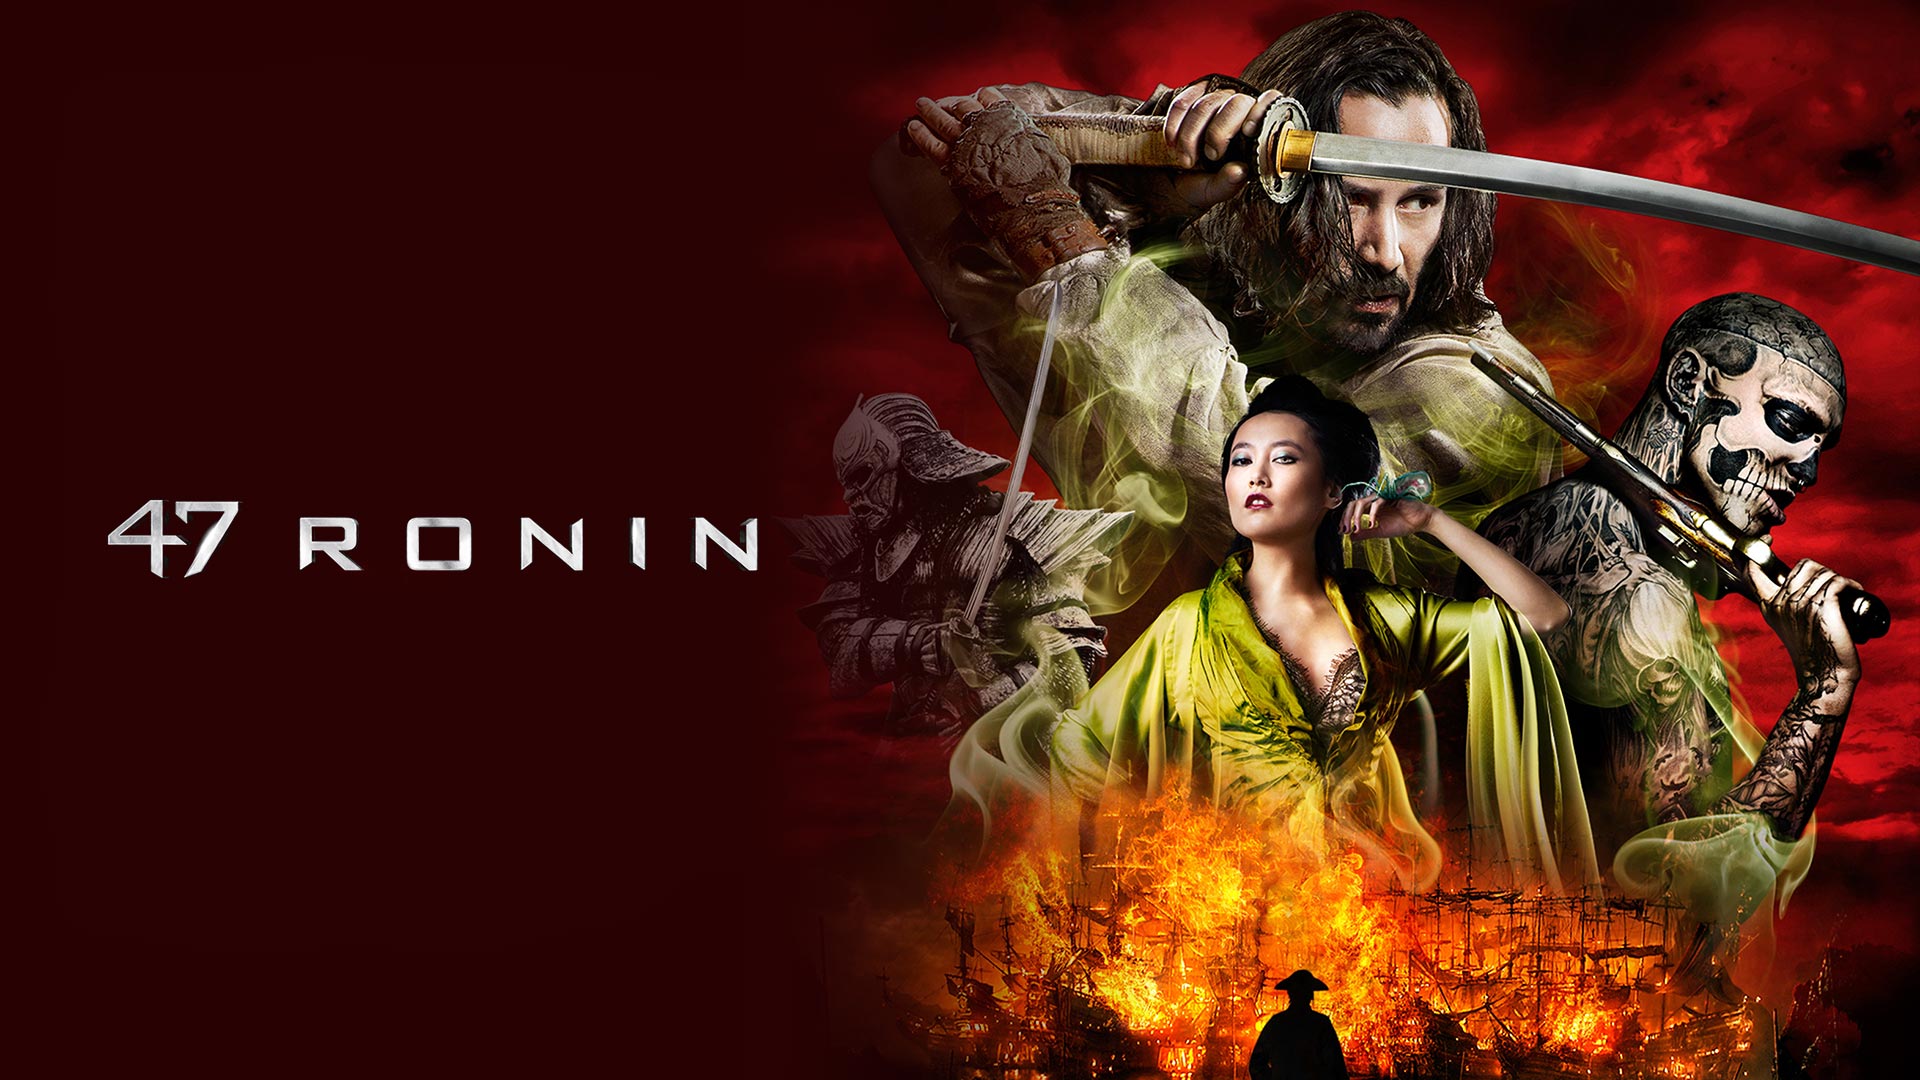 44-facts-about-the-movie-the-47-ronin